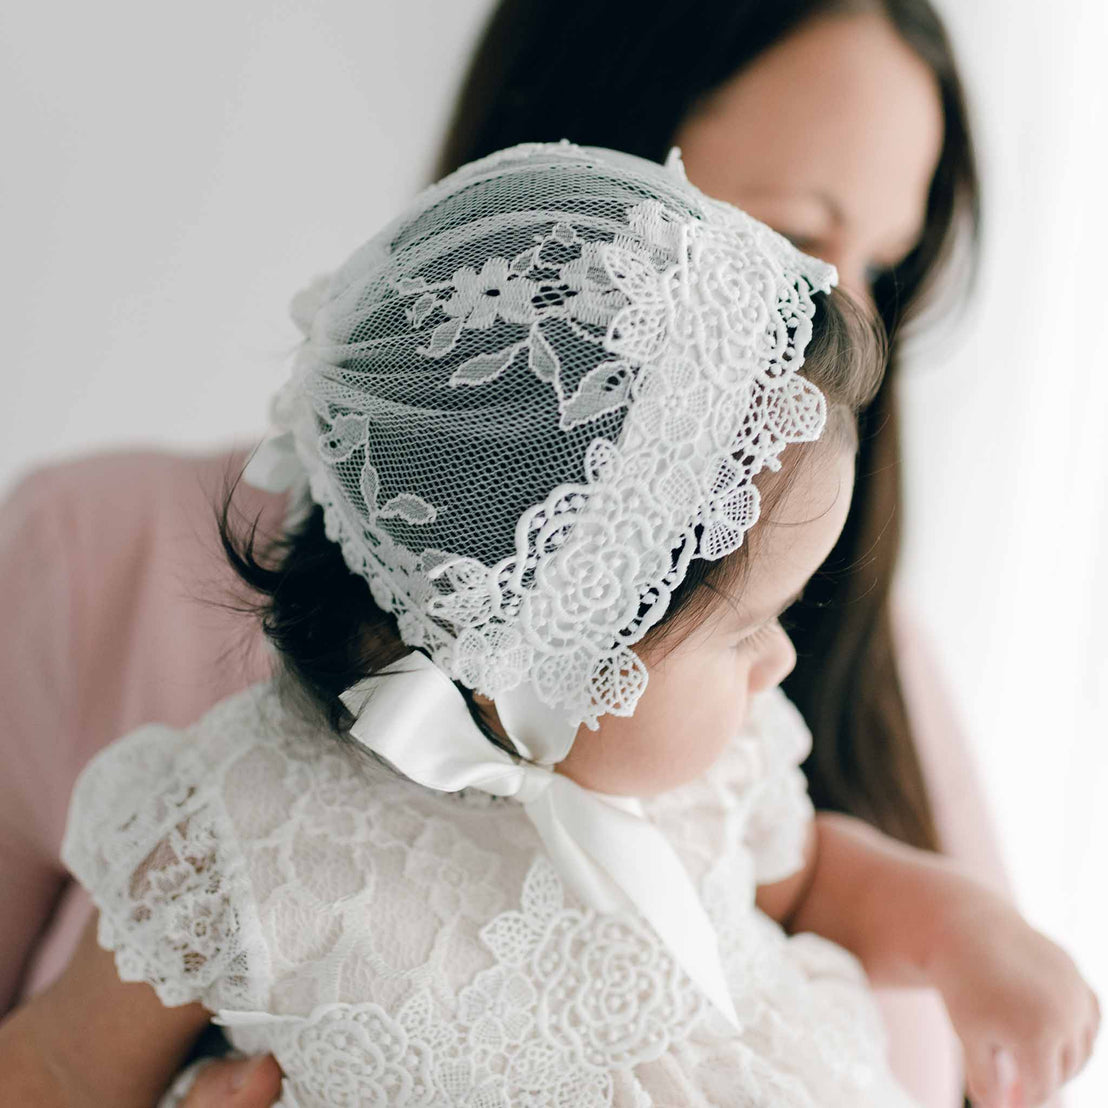 A close-up of a baby wearing a Juliette Lace Bonnet, cradled gently by a woman in a soft pink blouse.